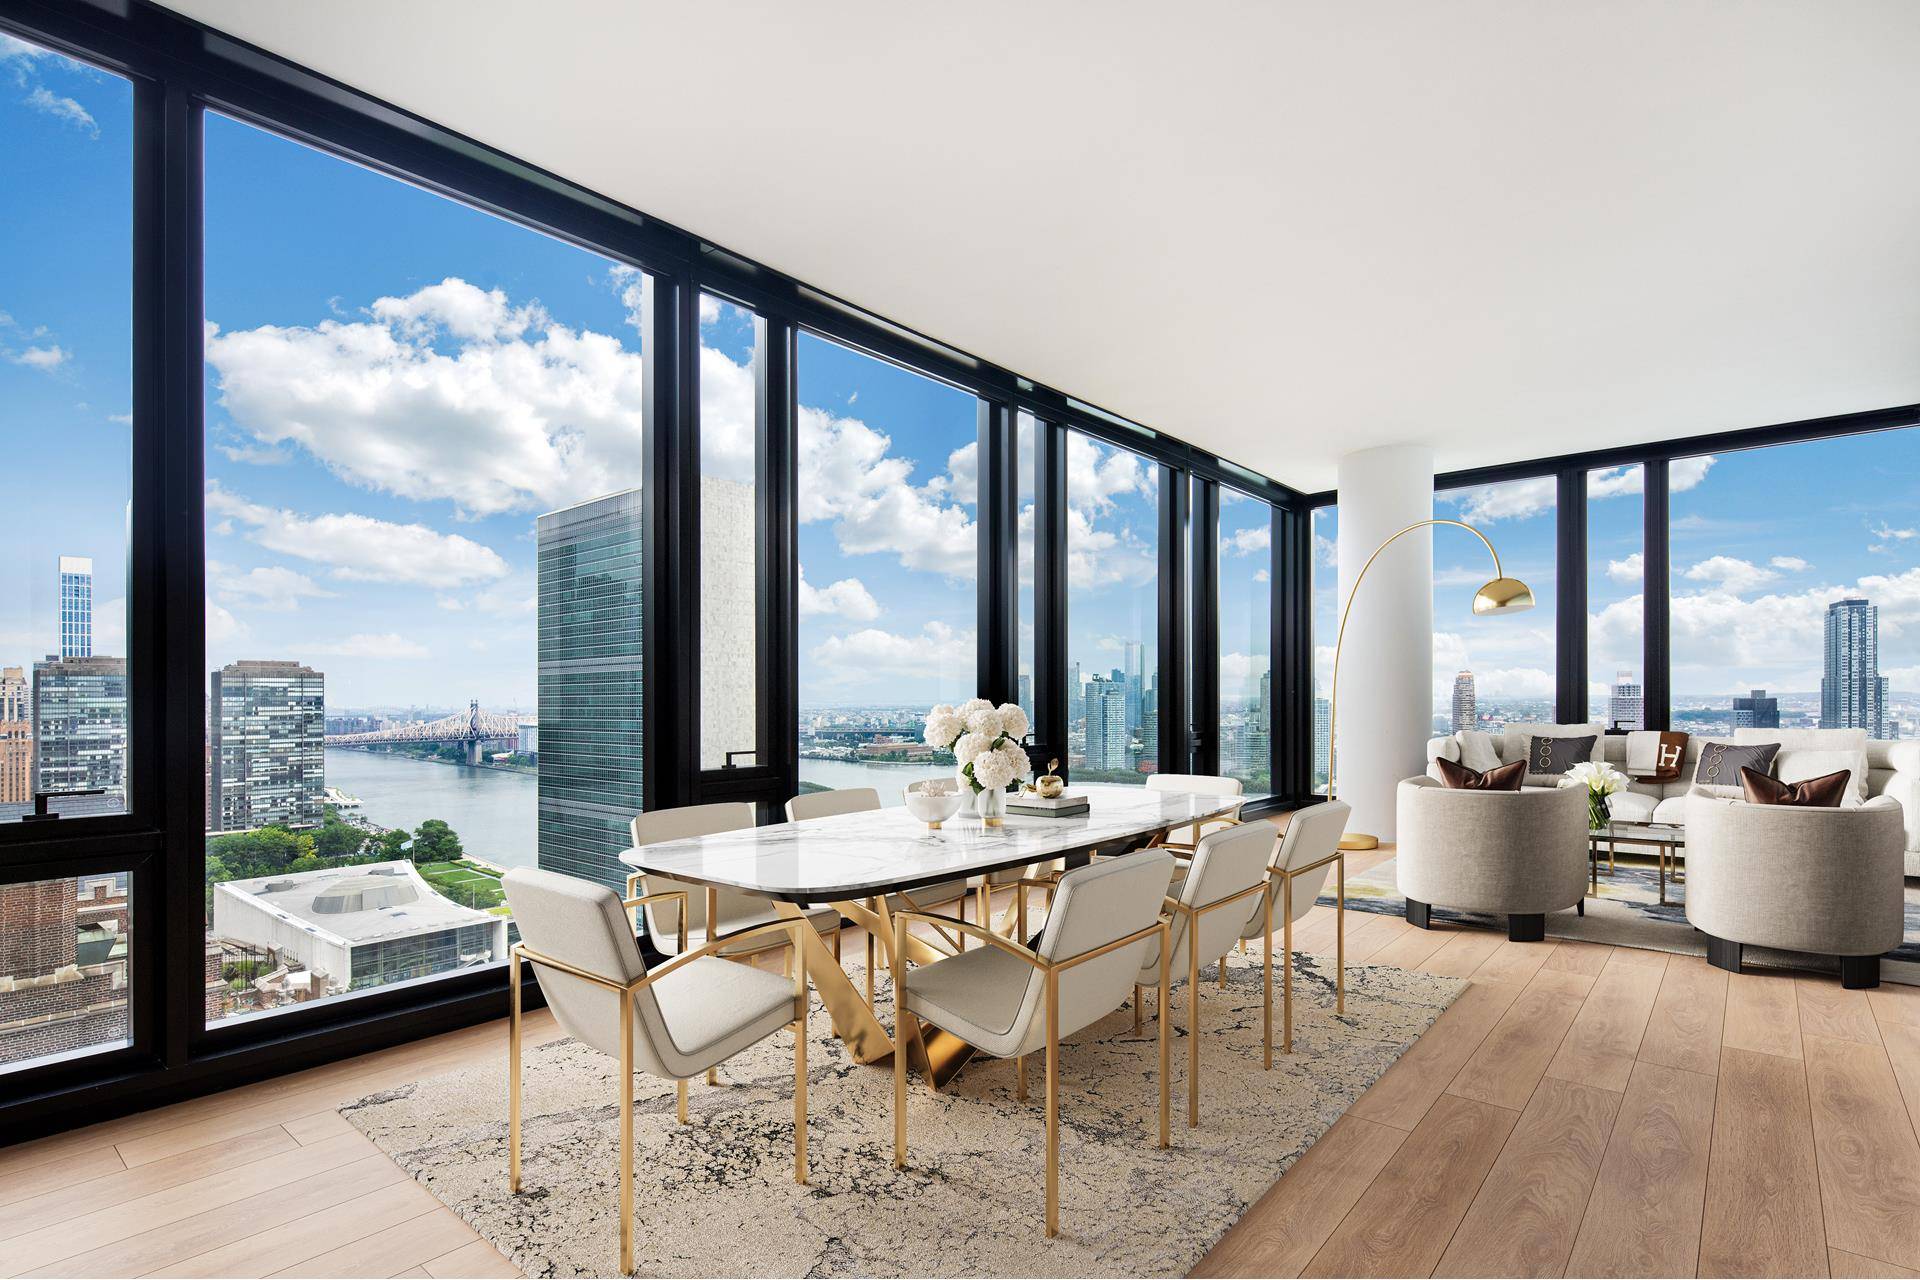 Welcome to Residence 32K at 695 First Avenue, where luxury living meets breathtaking views in the heart of Manhattan.